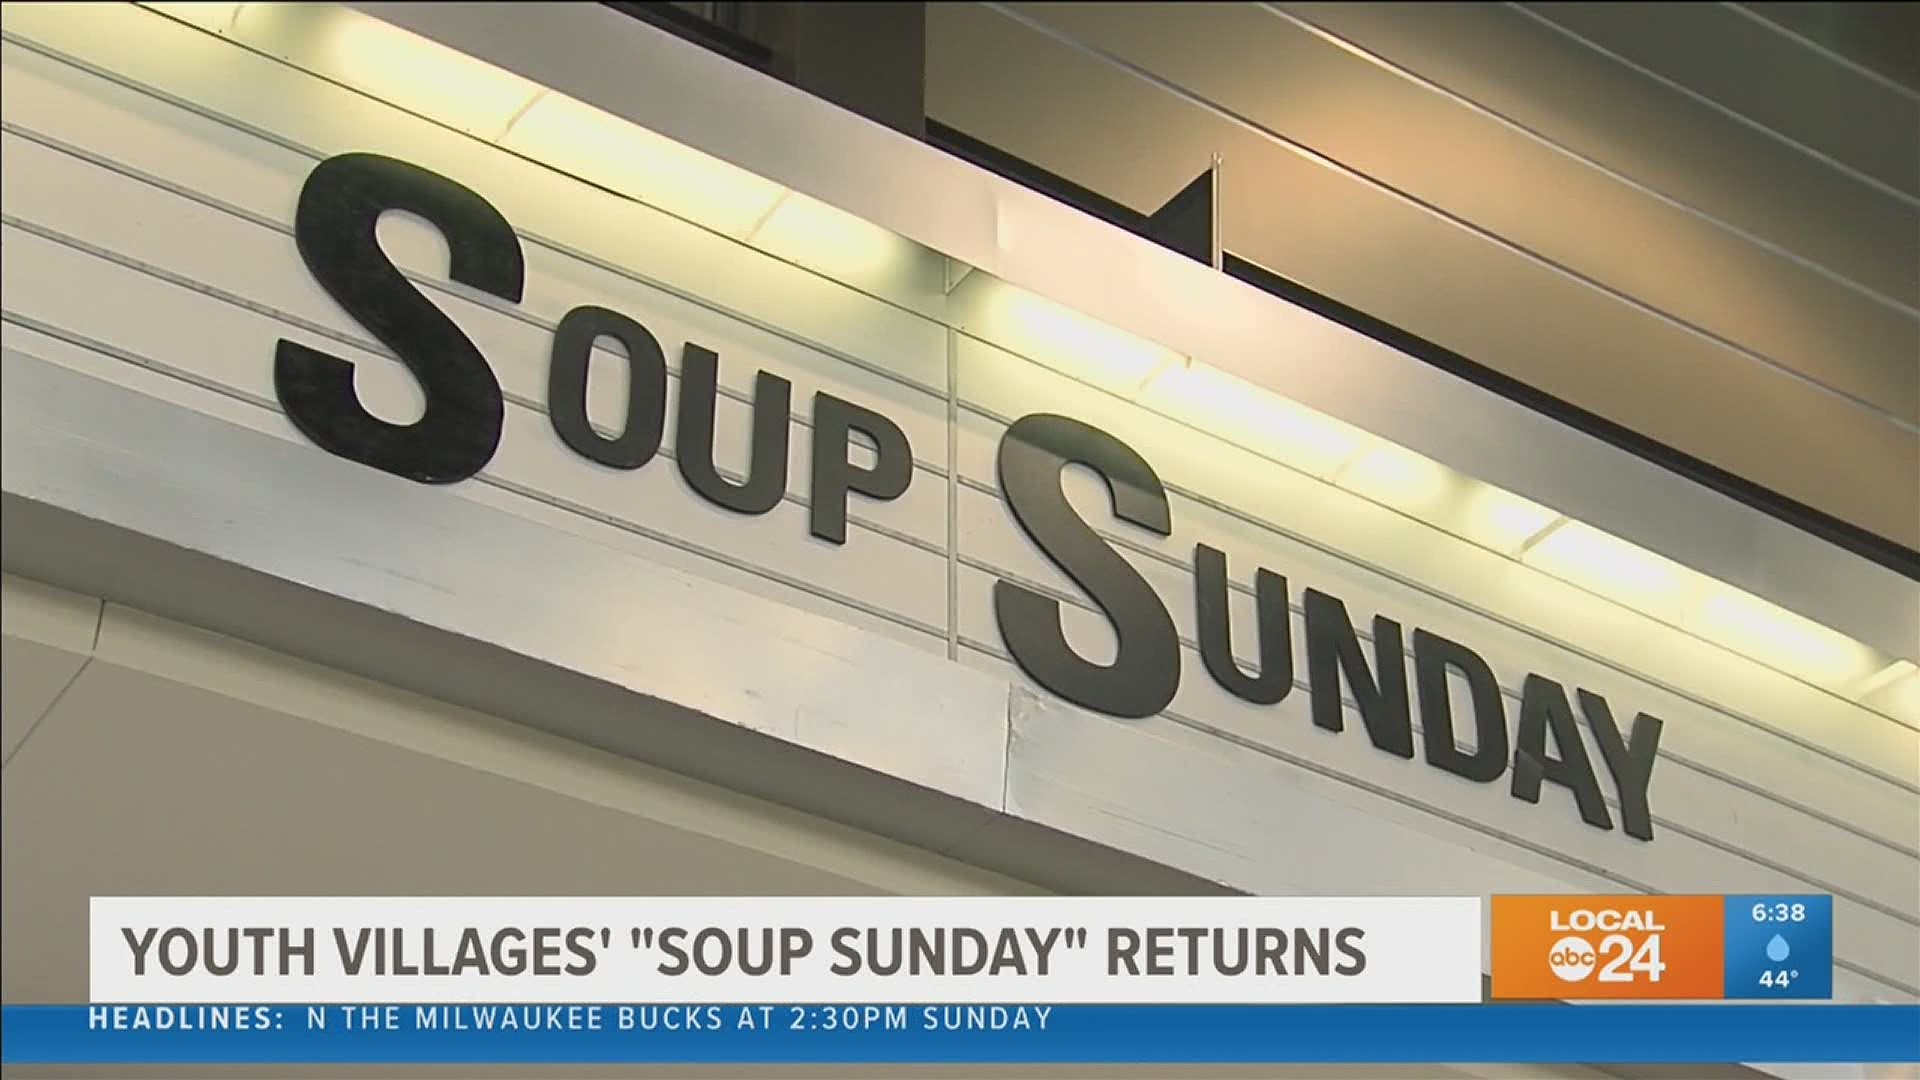 Soup Sunday is partnering with 20+ restaurants this weekend instead of having a massive in-person event